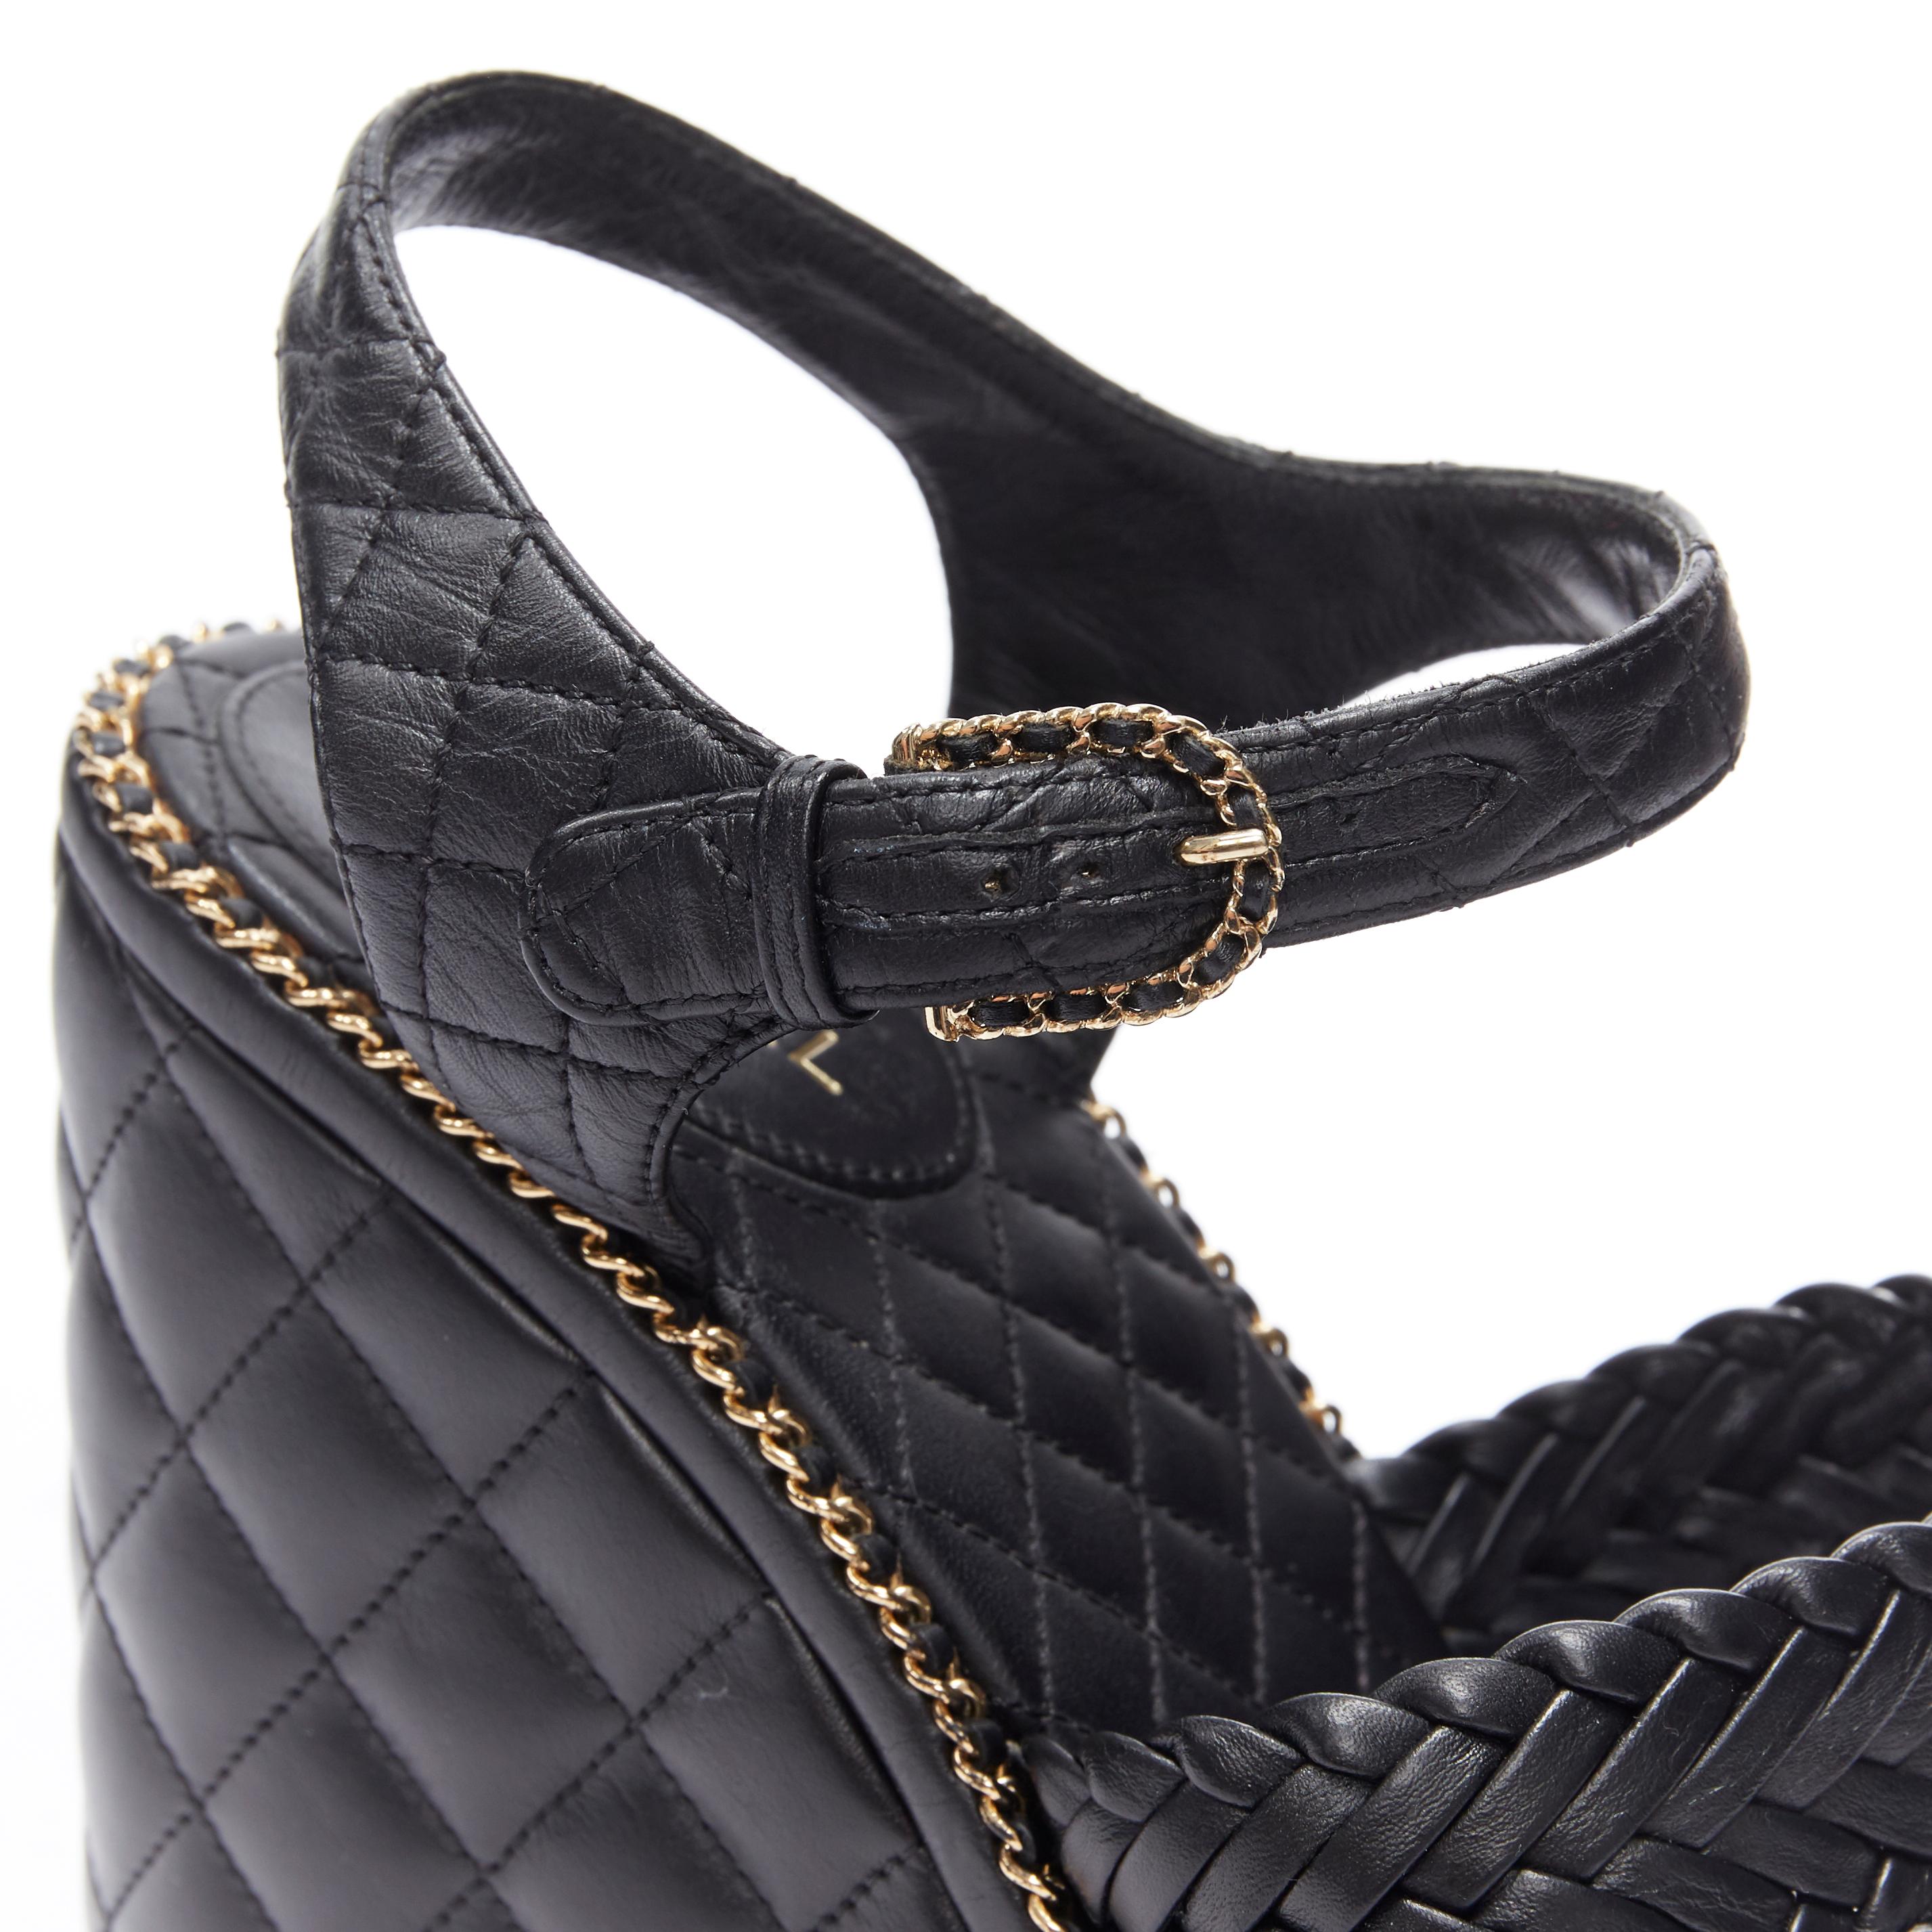 CHANEL SS15 black braided leather 2.55 chain diamond quilted wedge sandal EU39 2